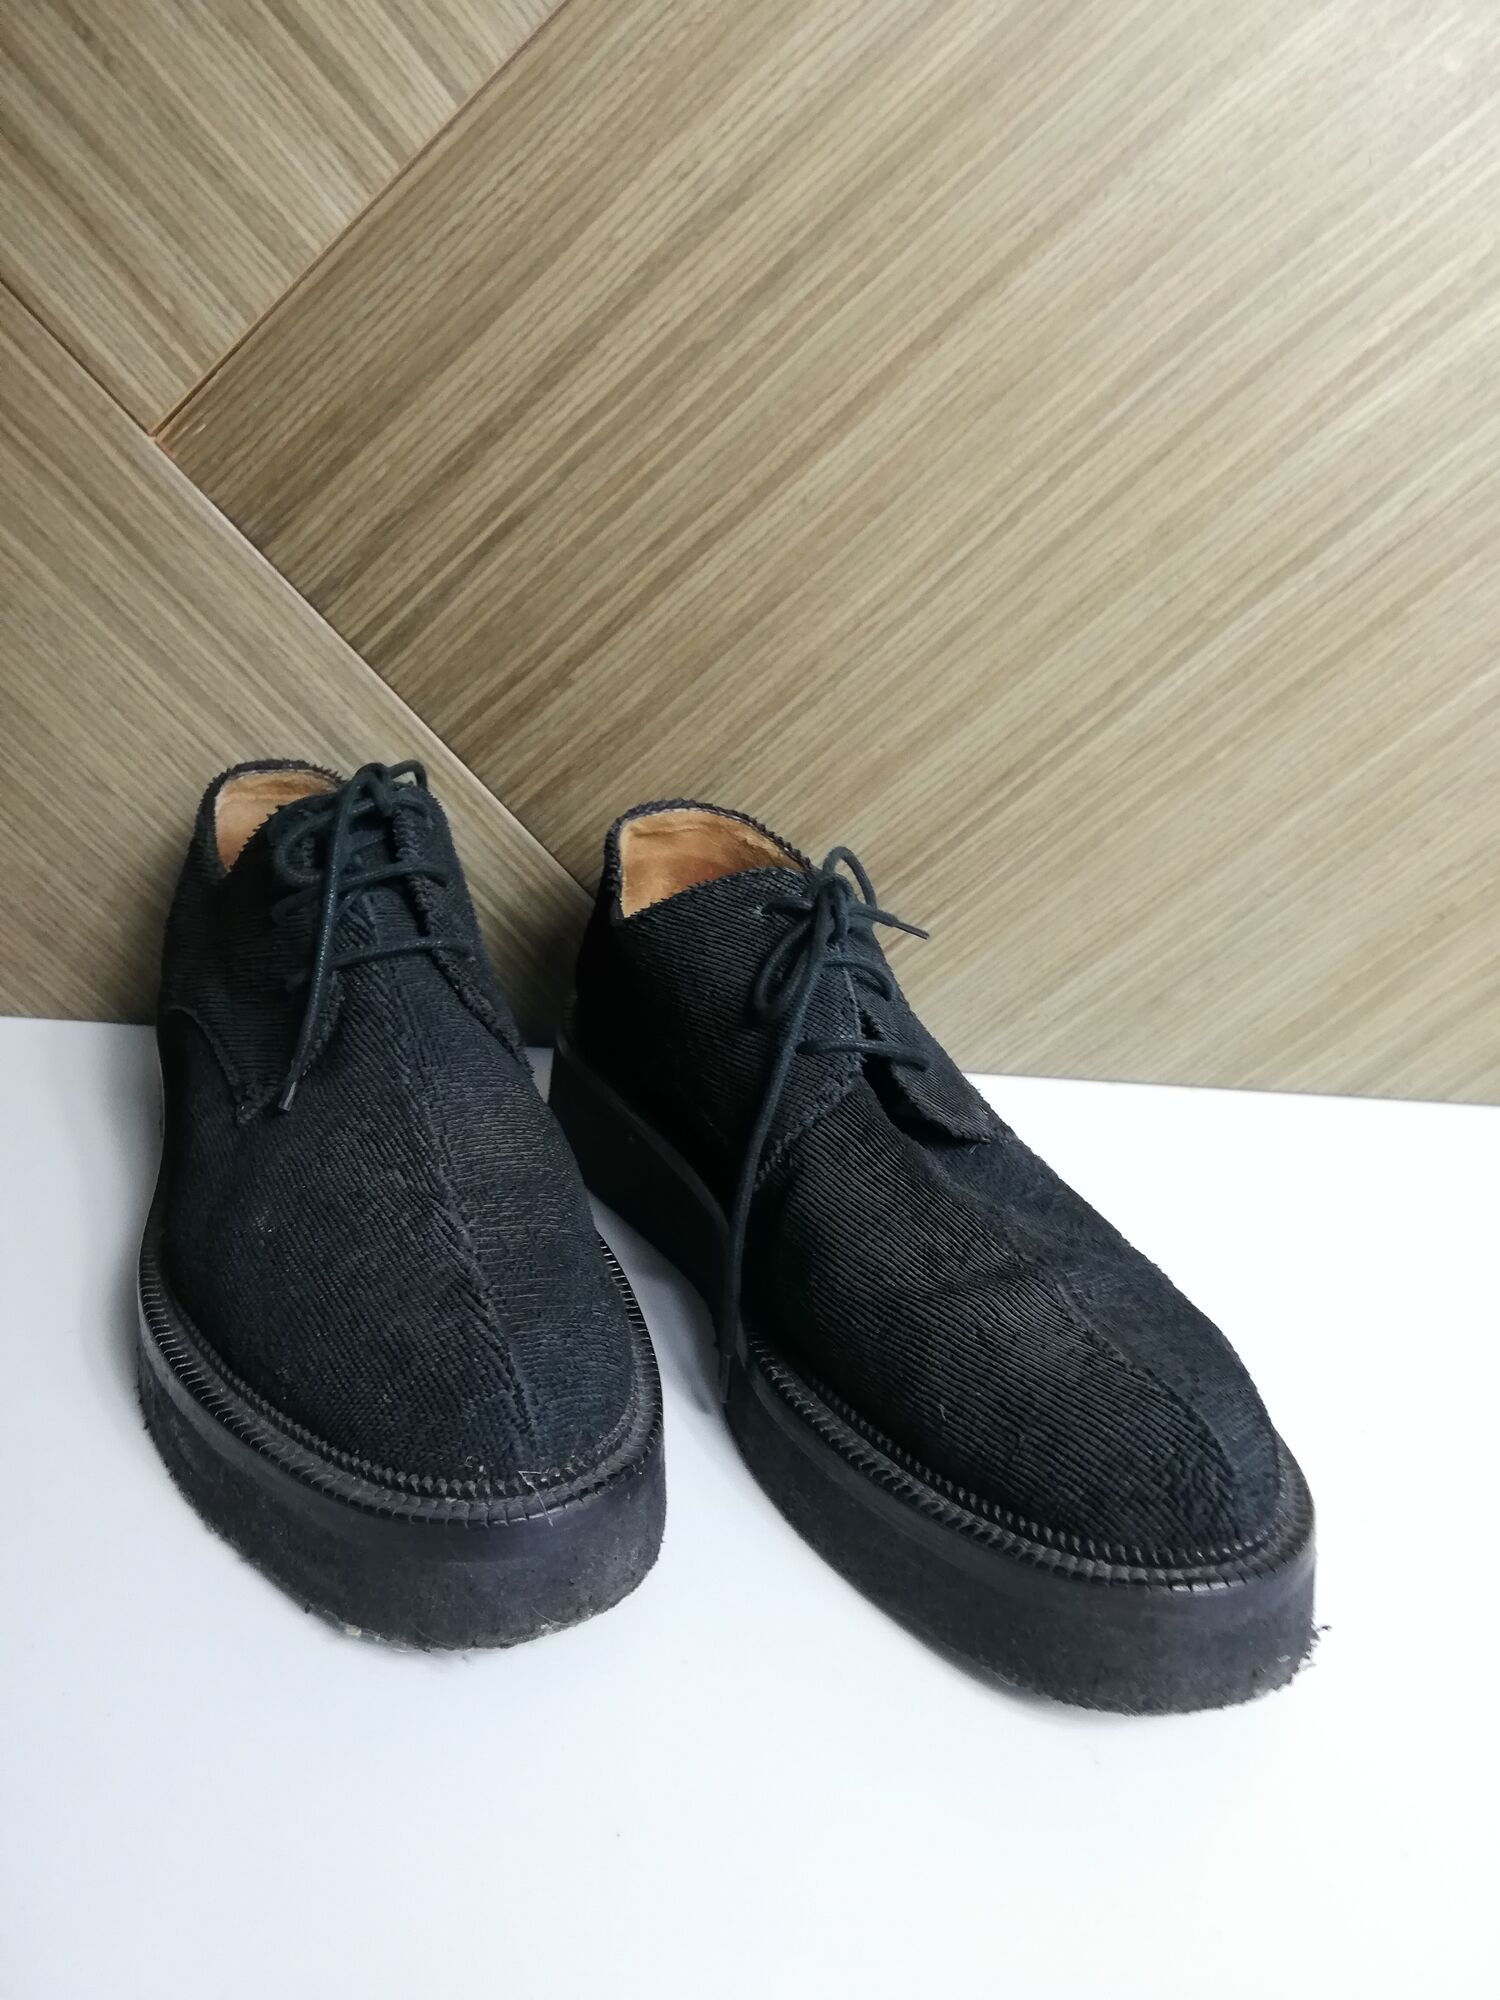 Derby Shoes Damir Doma - 44, buy pre-owned at 119 EUR